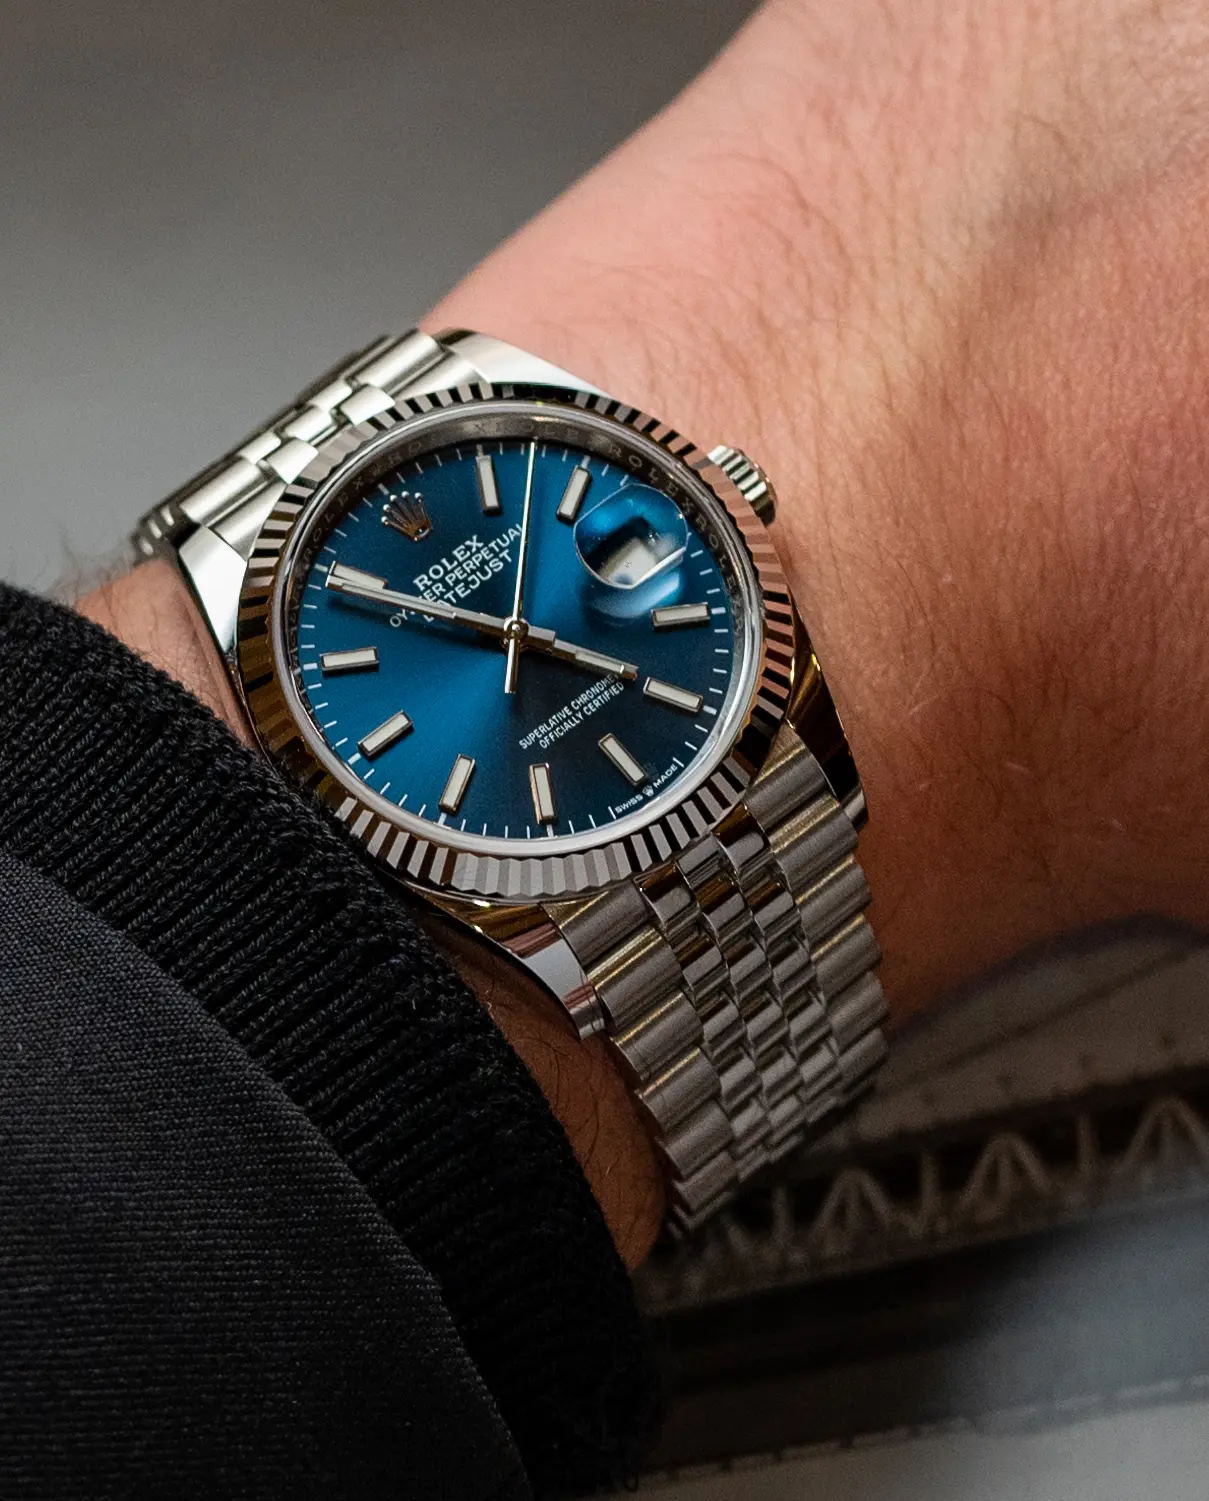 A MONTH ON THE WRIST: Rolex ref. 126234